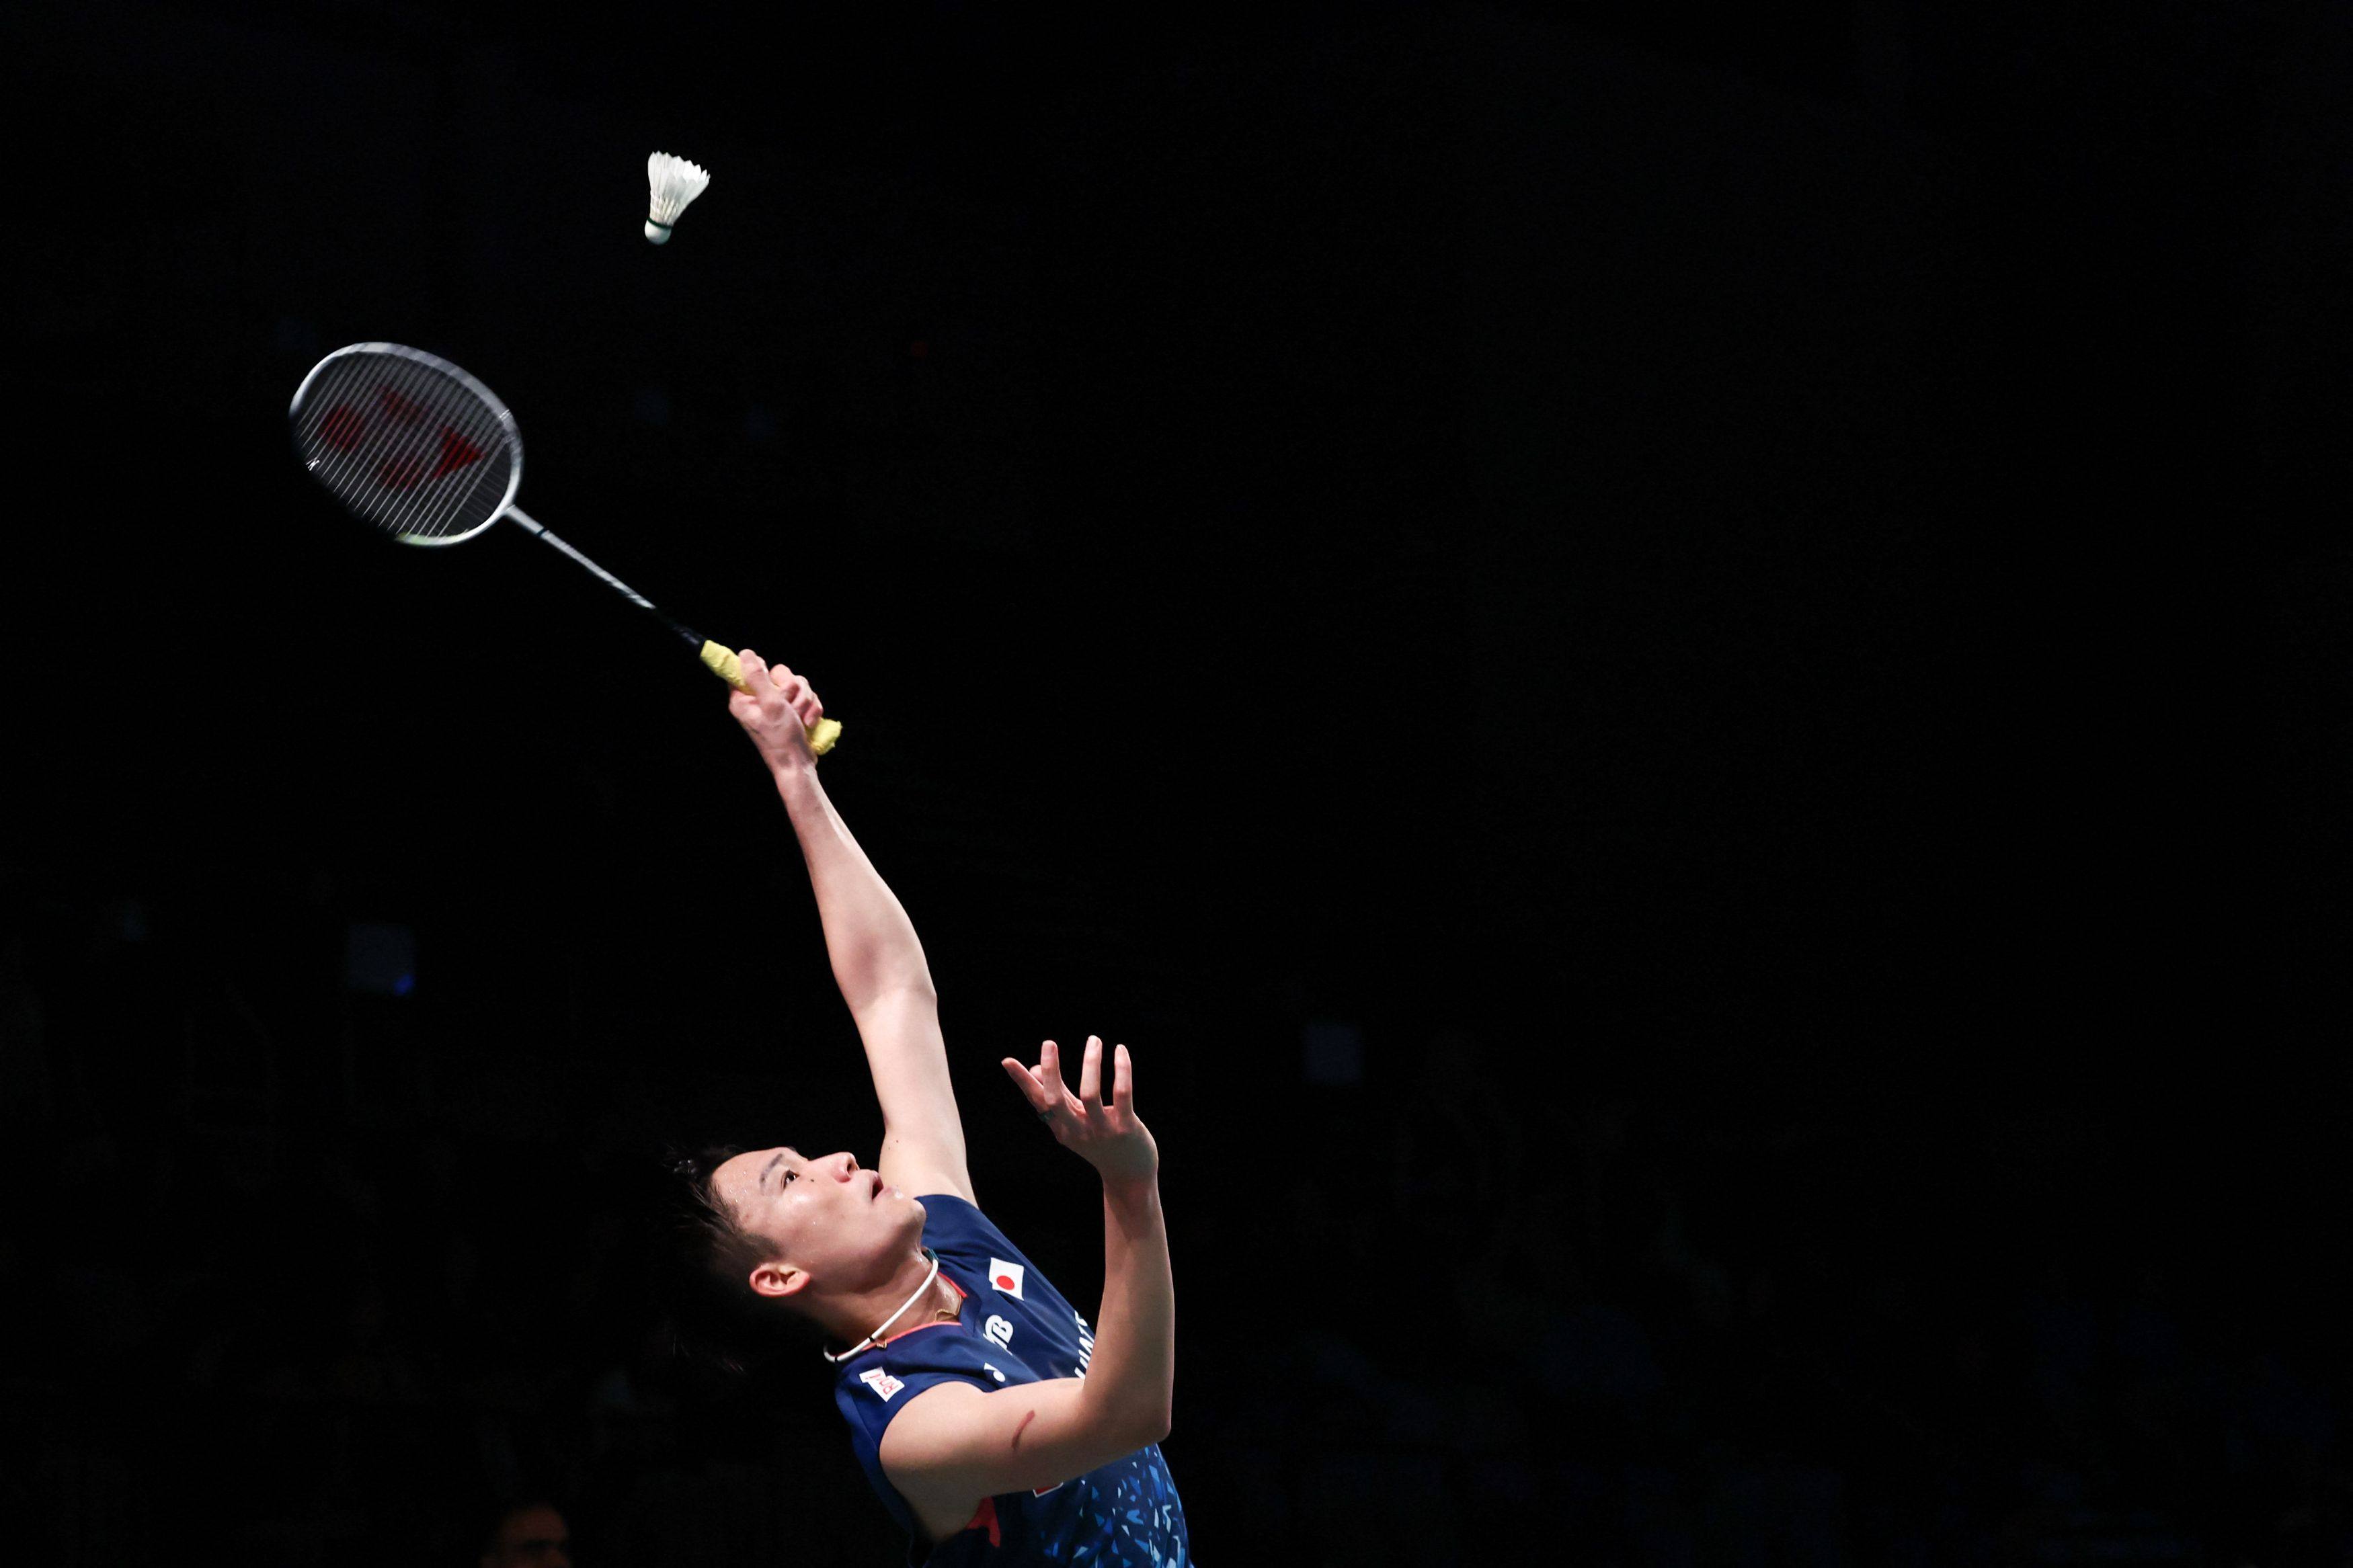 Japan’s Kento Momota has fallen to world No 48 after years battling injuries sustained in a car crash. Photo: AFP